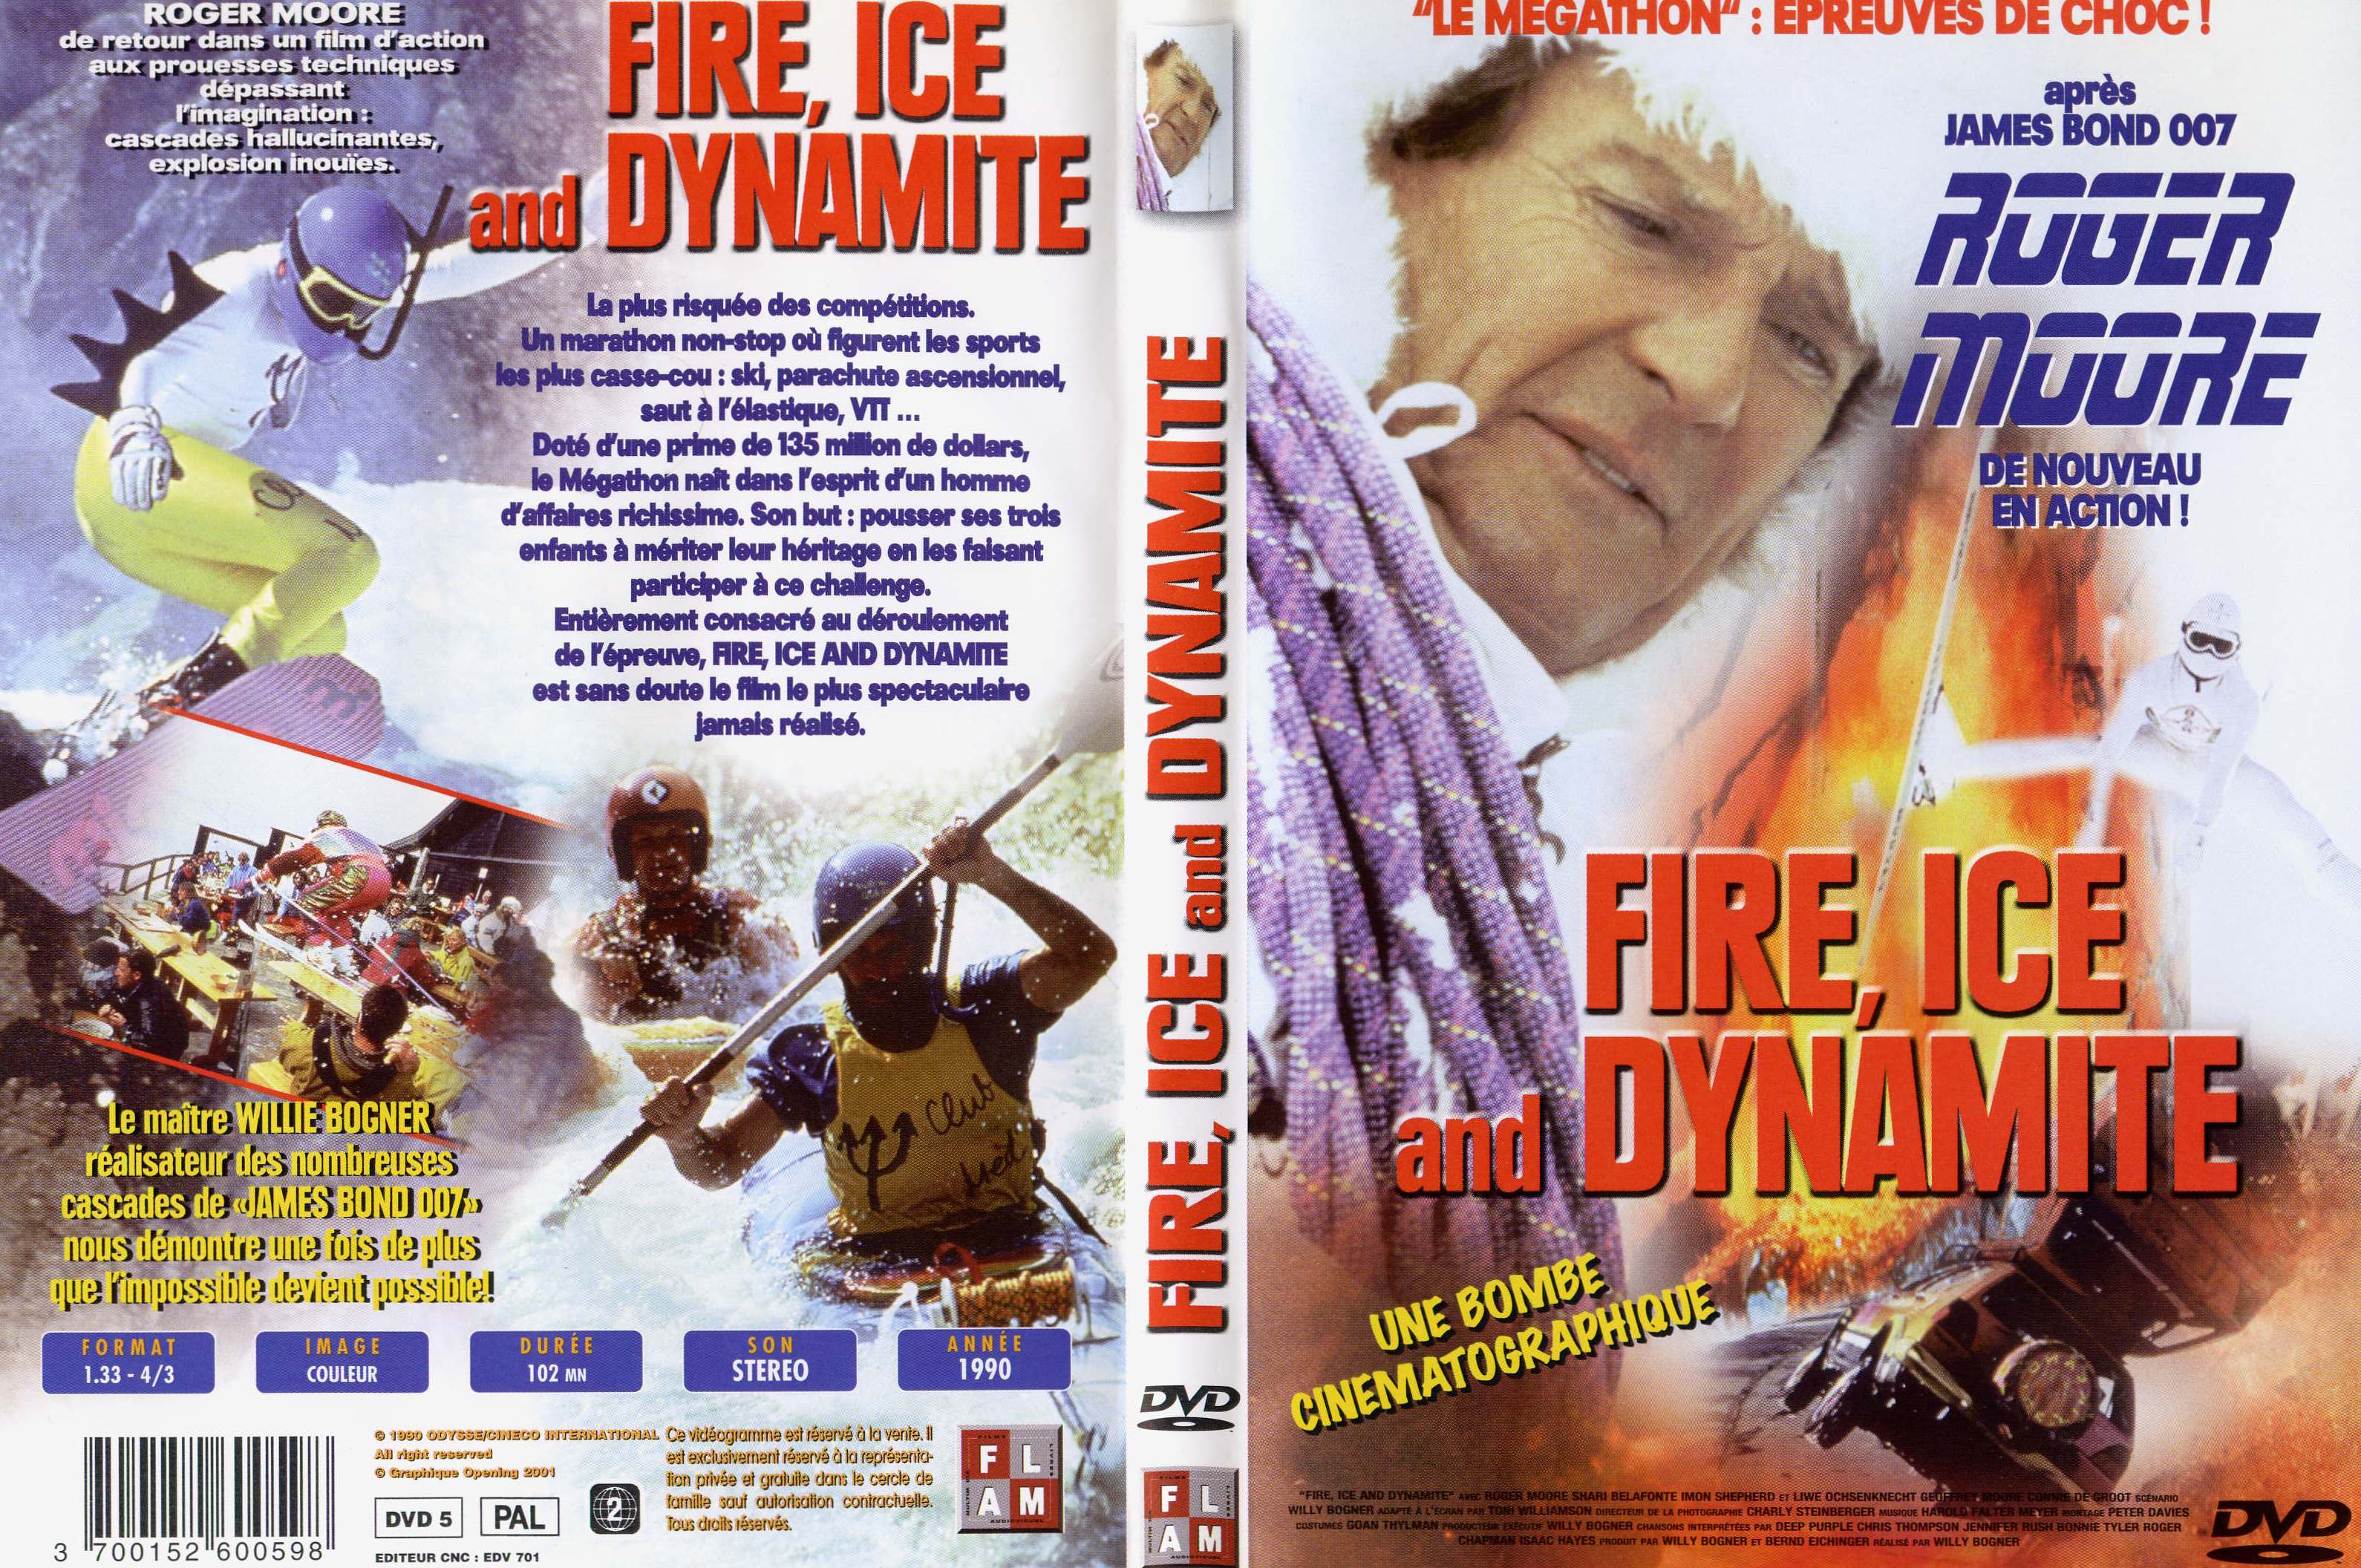 Jaquette DVD Fire Ice and Dynamite